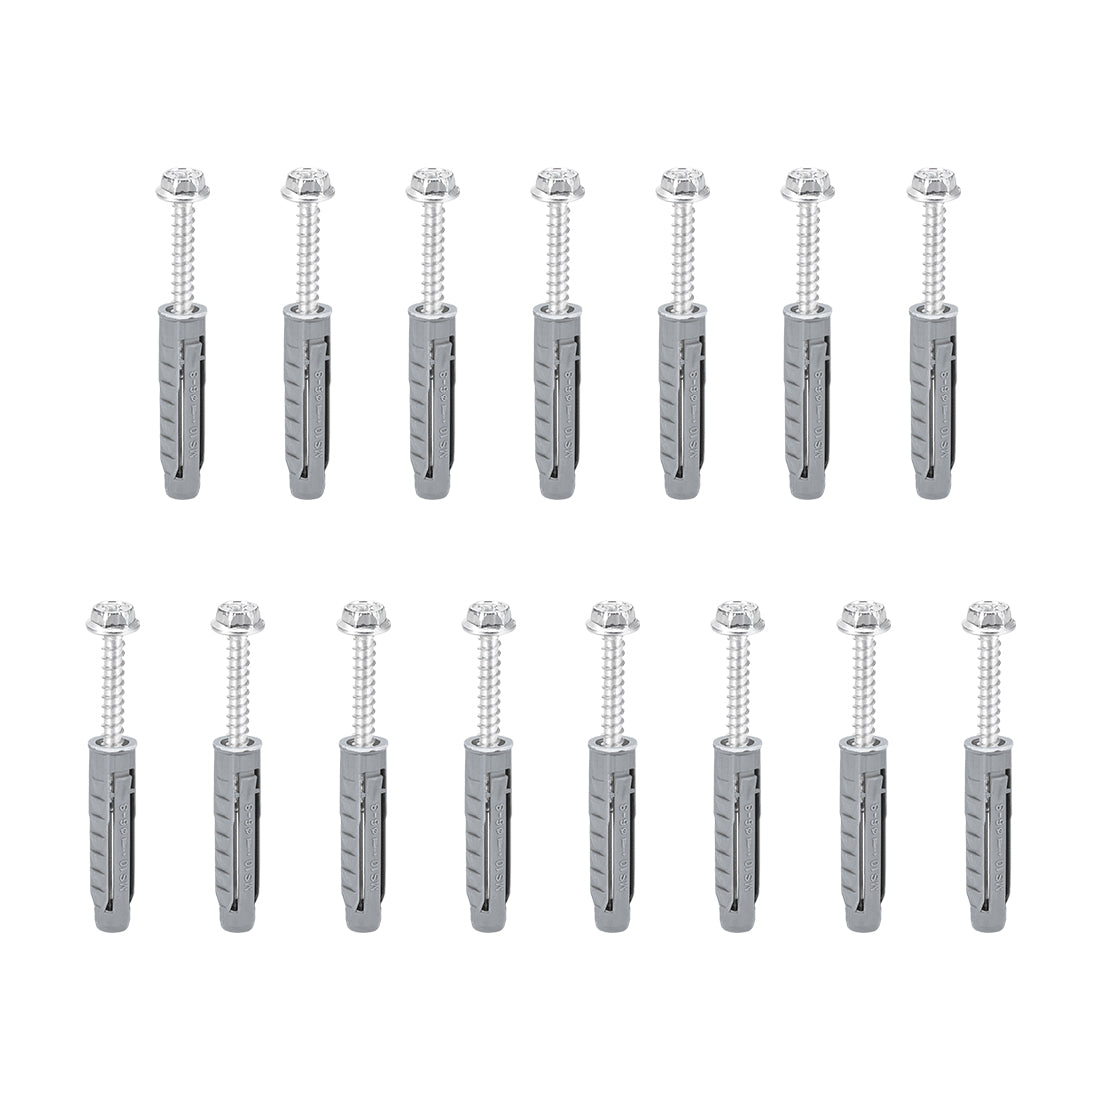 uxcell Uxcell 10x50mm Plastic Expansion Tube for Drywall with Hex Screws Gray 15pcs